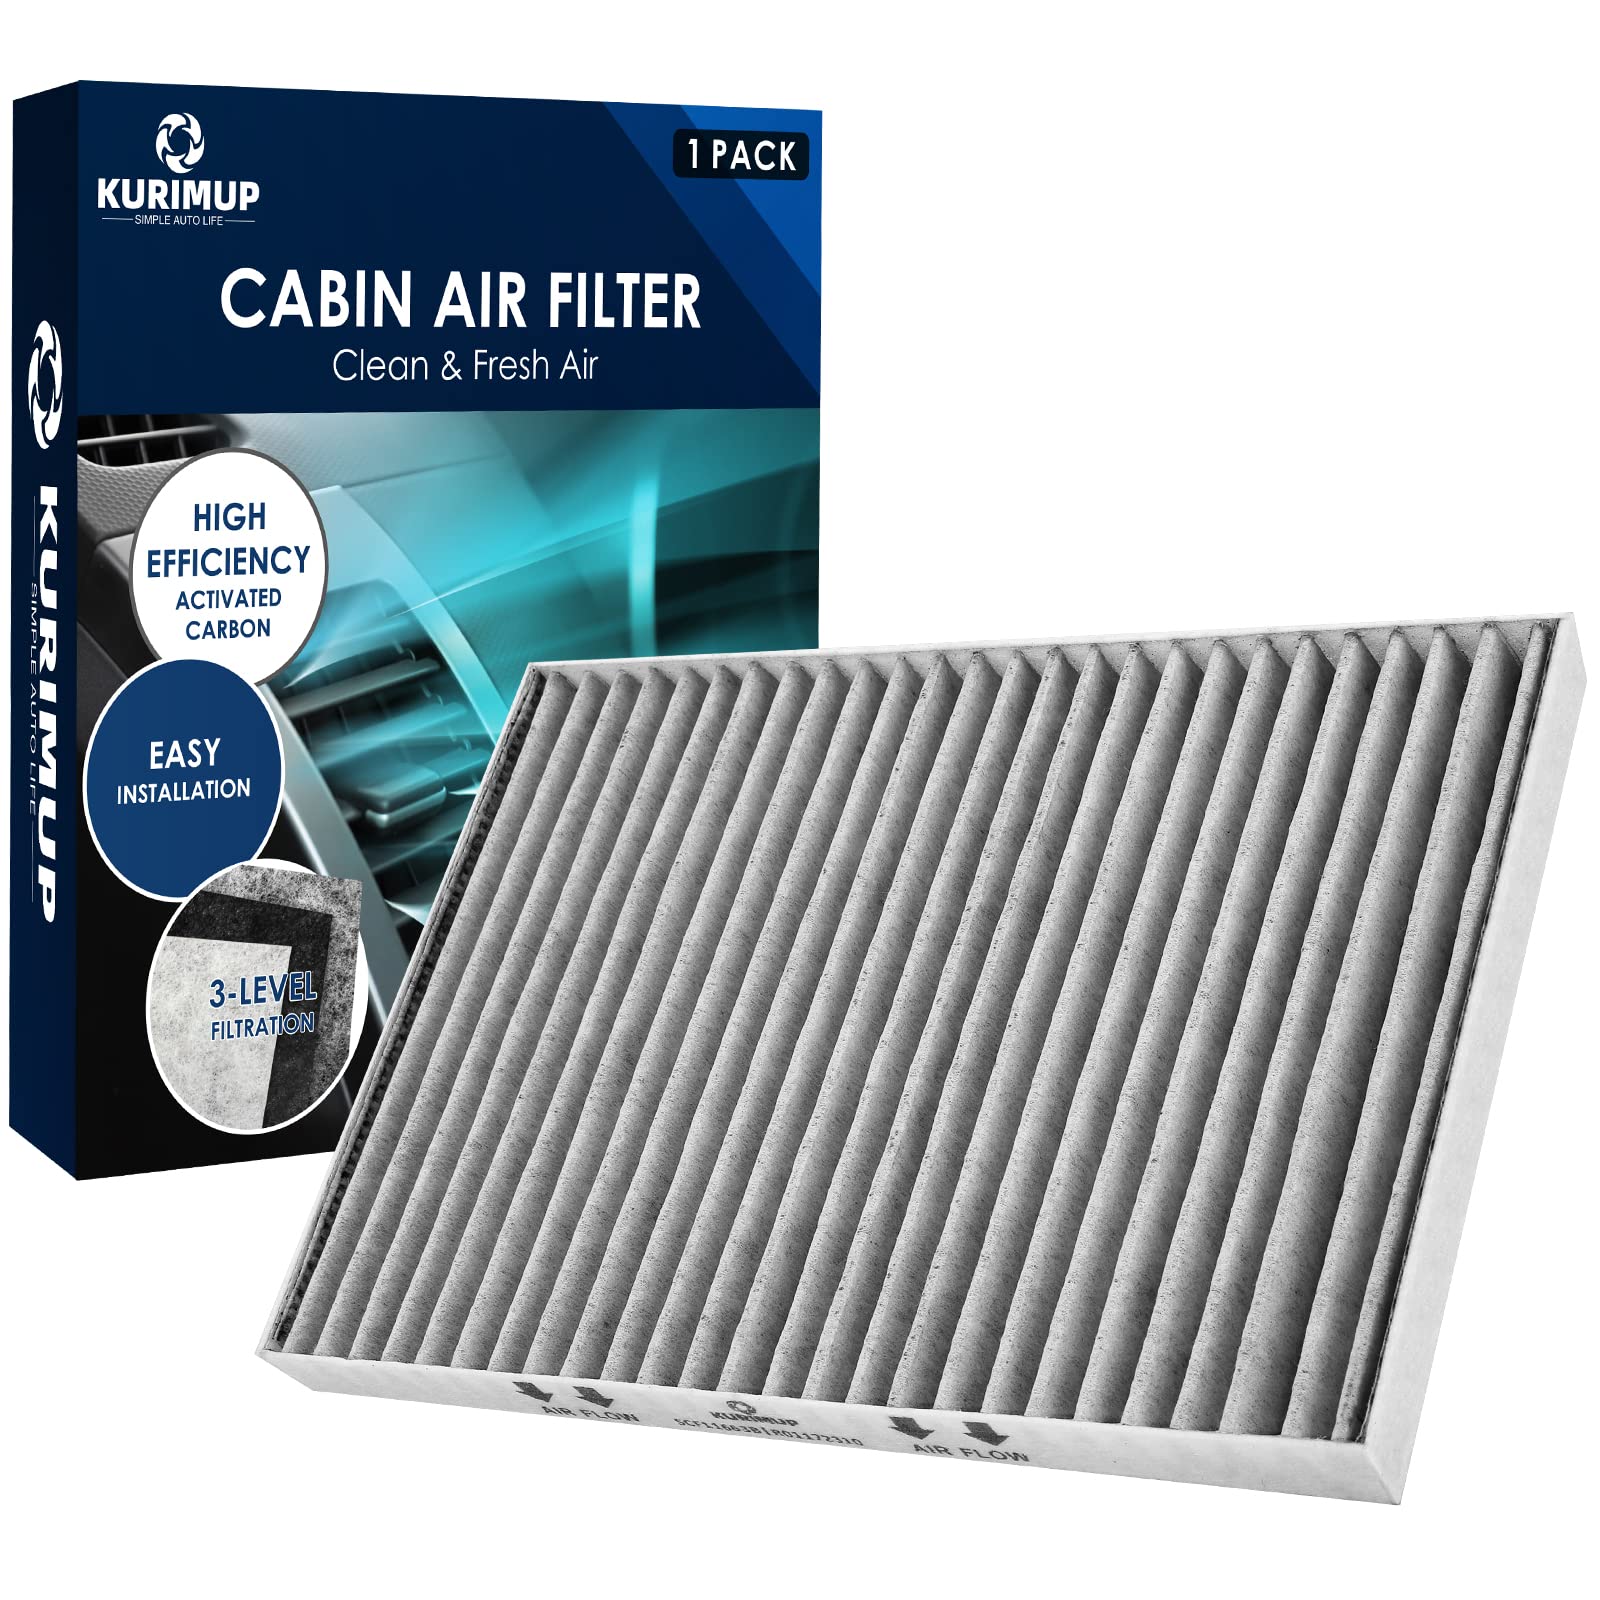 KURIMUP Premium Cabin Air Filter with Activated Carbon,Replacement for CF11663, Fit for Buick Enclave 08-17, Chevrolet Traverse 09-17, GMC Acadia 07-16, Saturn Outlook 07-10.